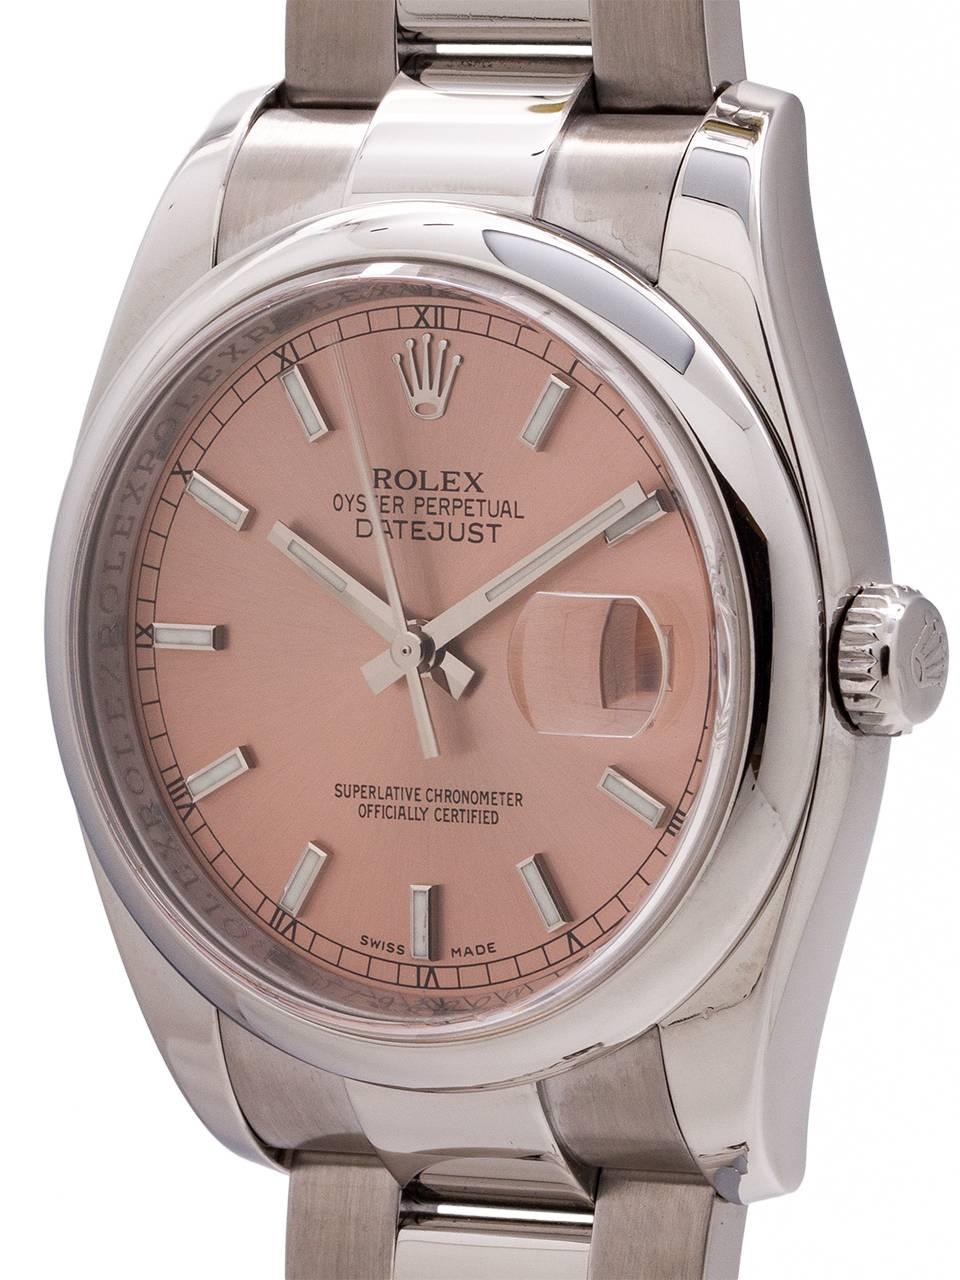 
Current model preowned Rolex Datejust ref 116200 stainless steel circa 2007. Featuring 36mm diameter case with smooth dome bezel, sapphire crystal, and beautiful original pink dial with stick luminova indexes and silver baton luminova hands.